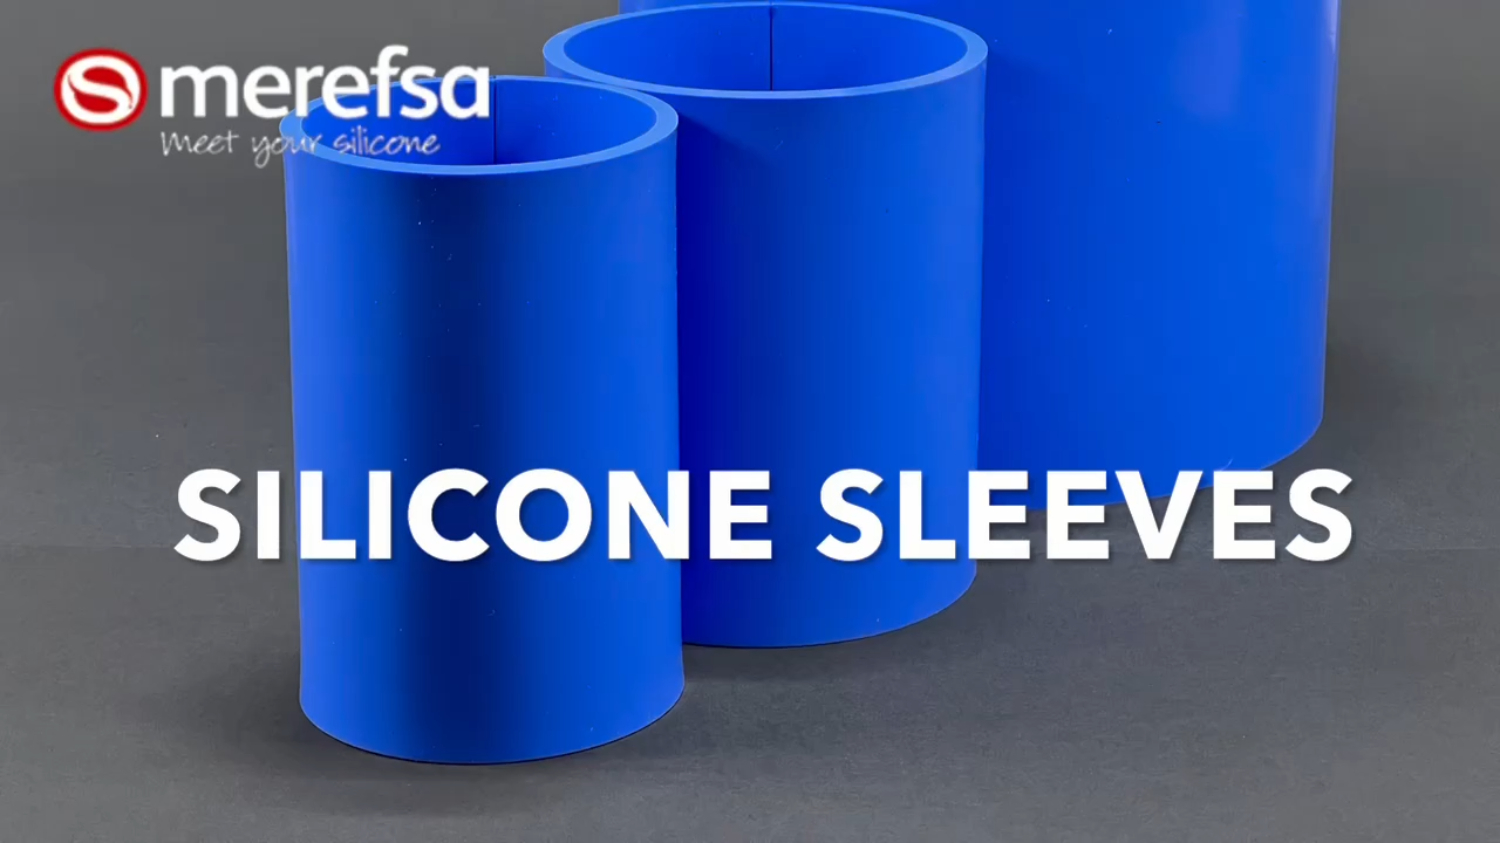 Silicone Sleeves Merefsa